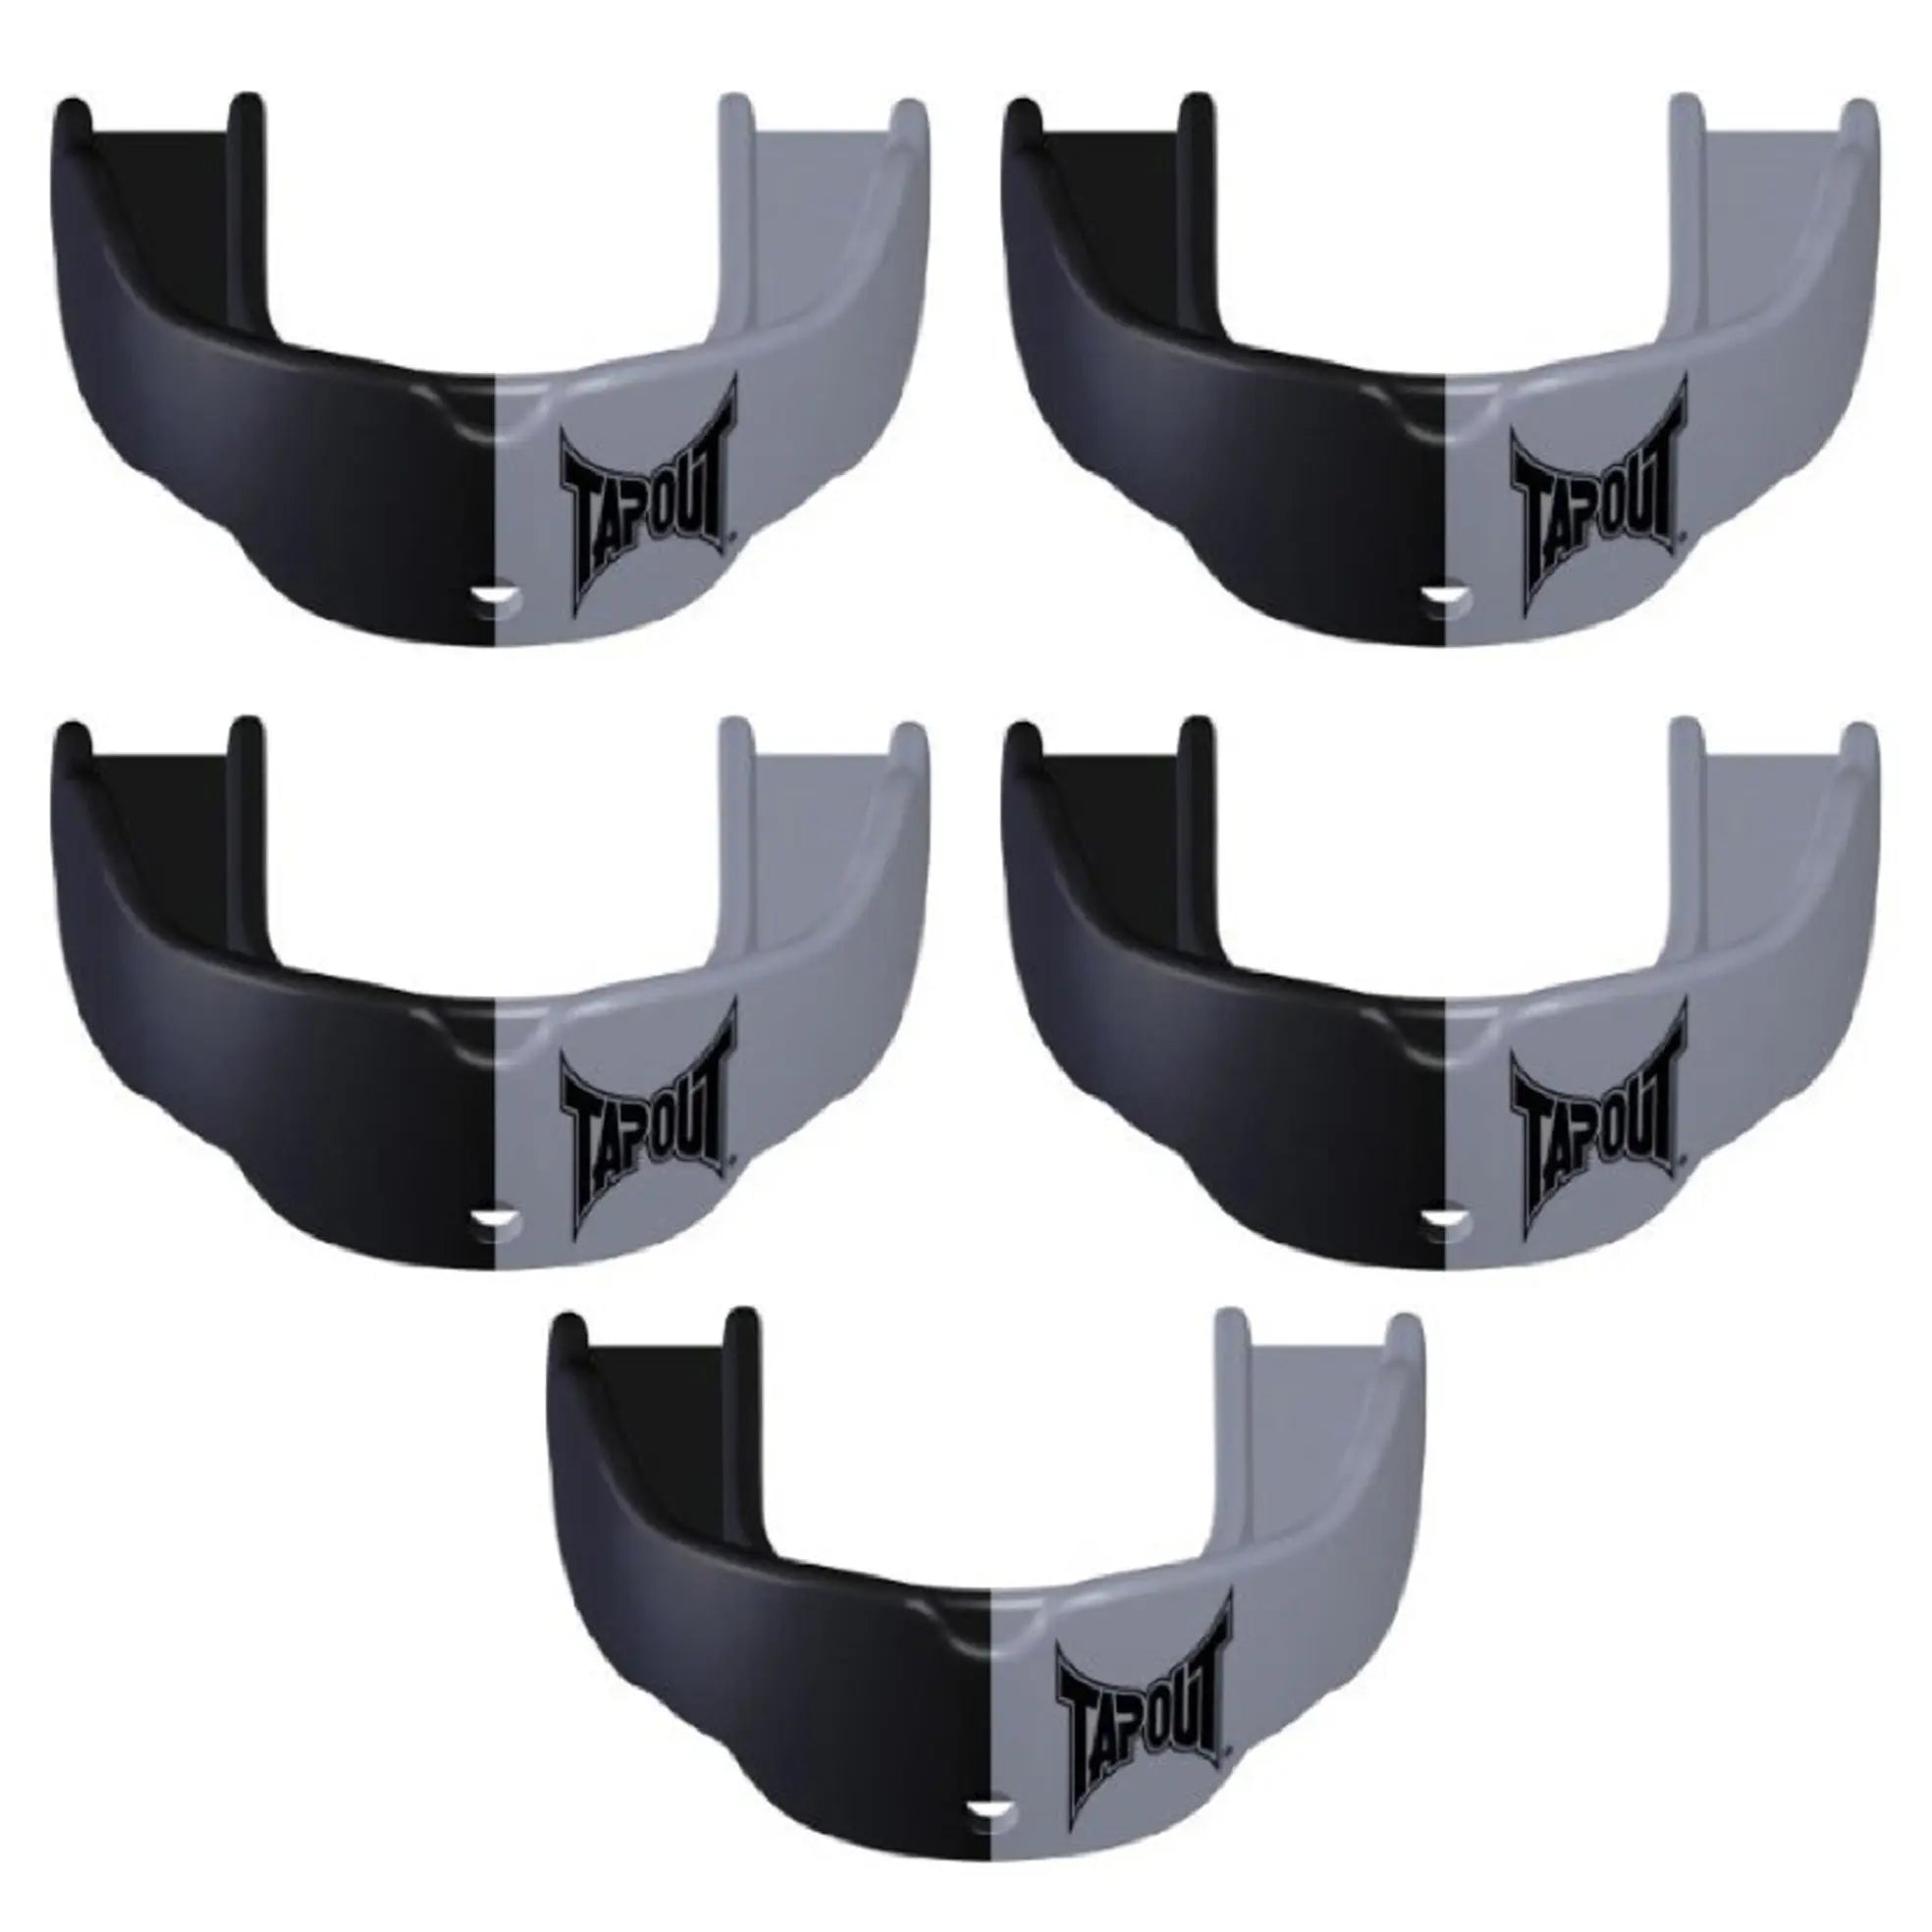 Tapout Youth Protective Sports Mouthguard with Strap 5-Pack - Silver/Black Tapout